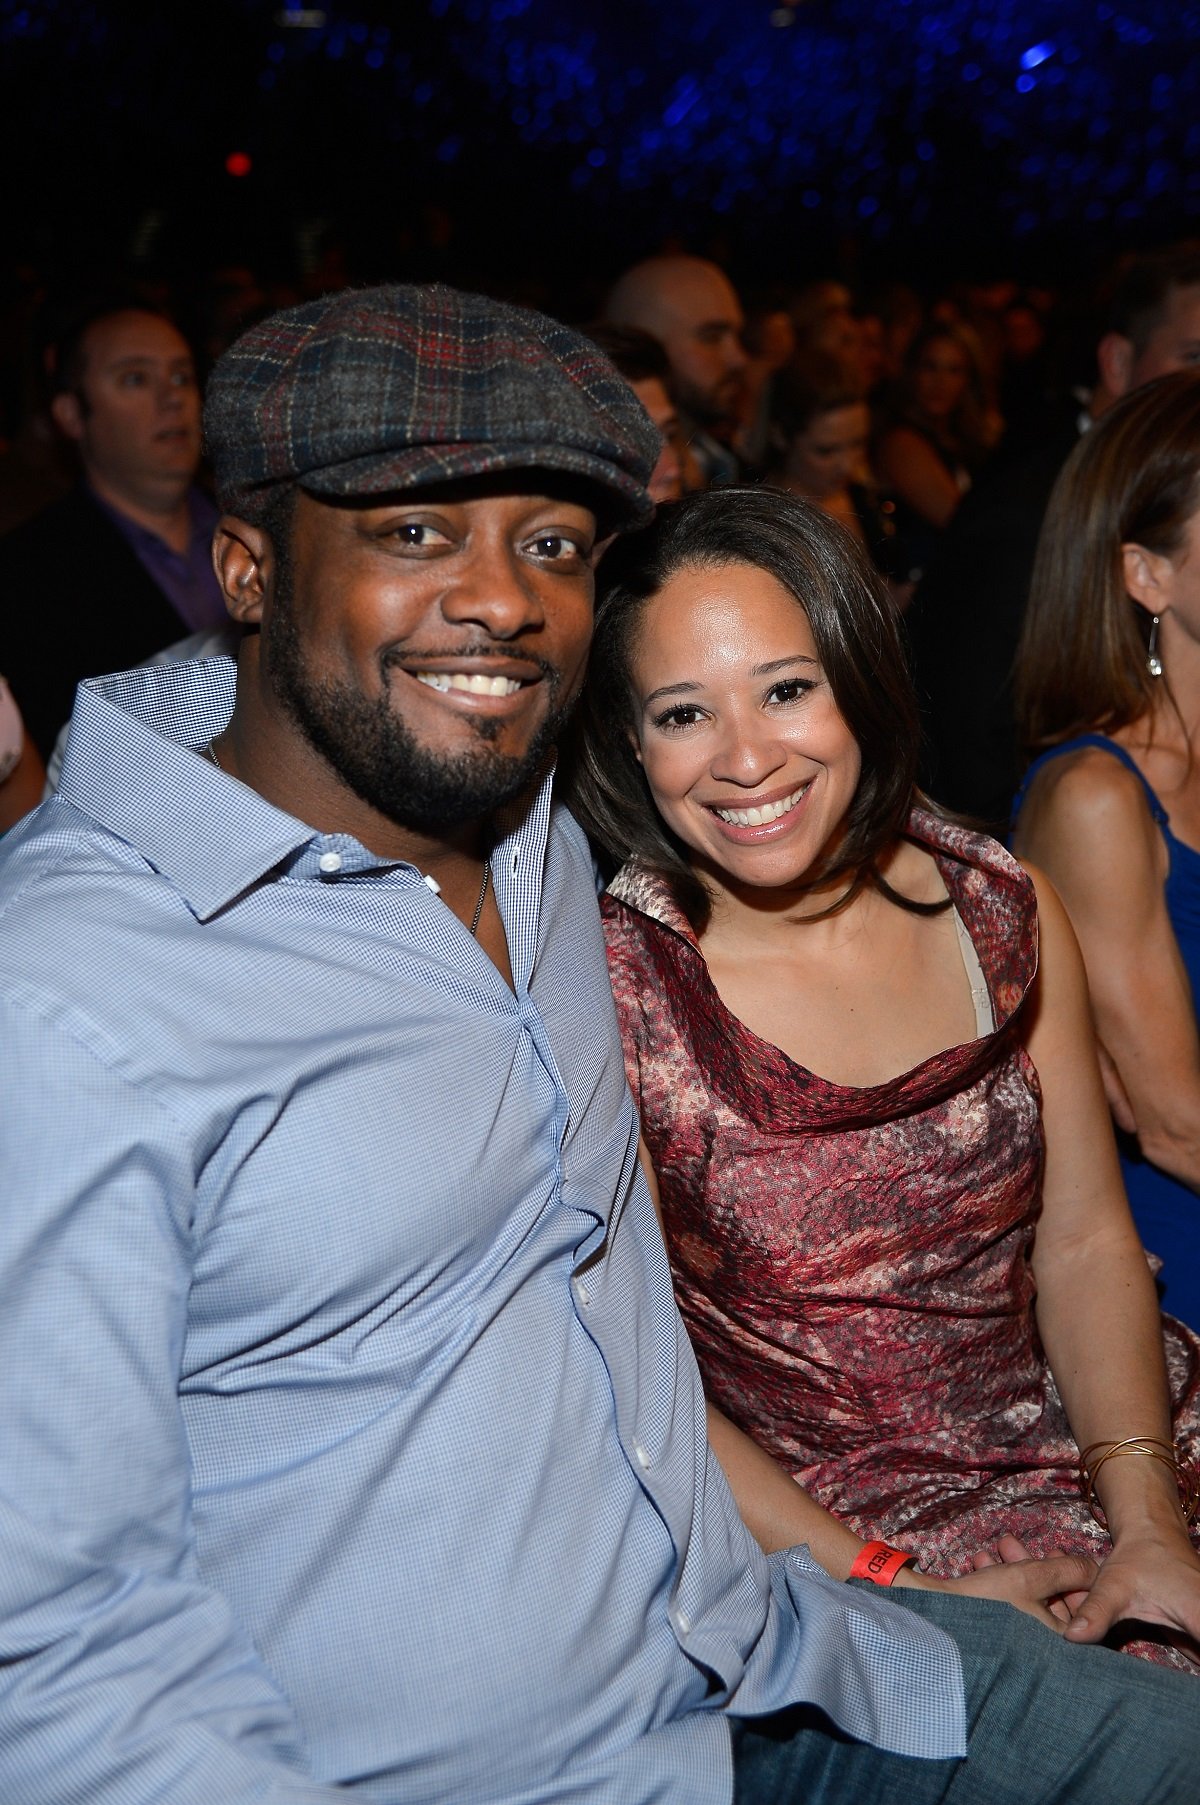 Mike Tomlin and Kiya Winston attend the Country Music Awards at the MGM Grand Garden